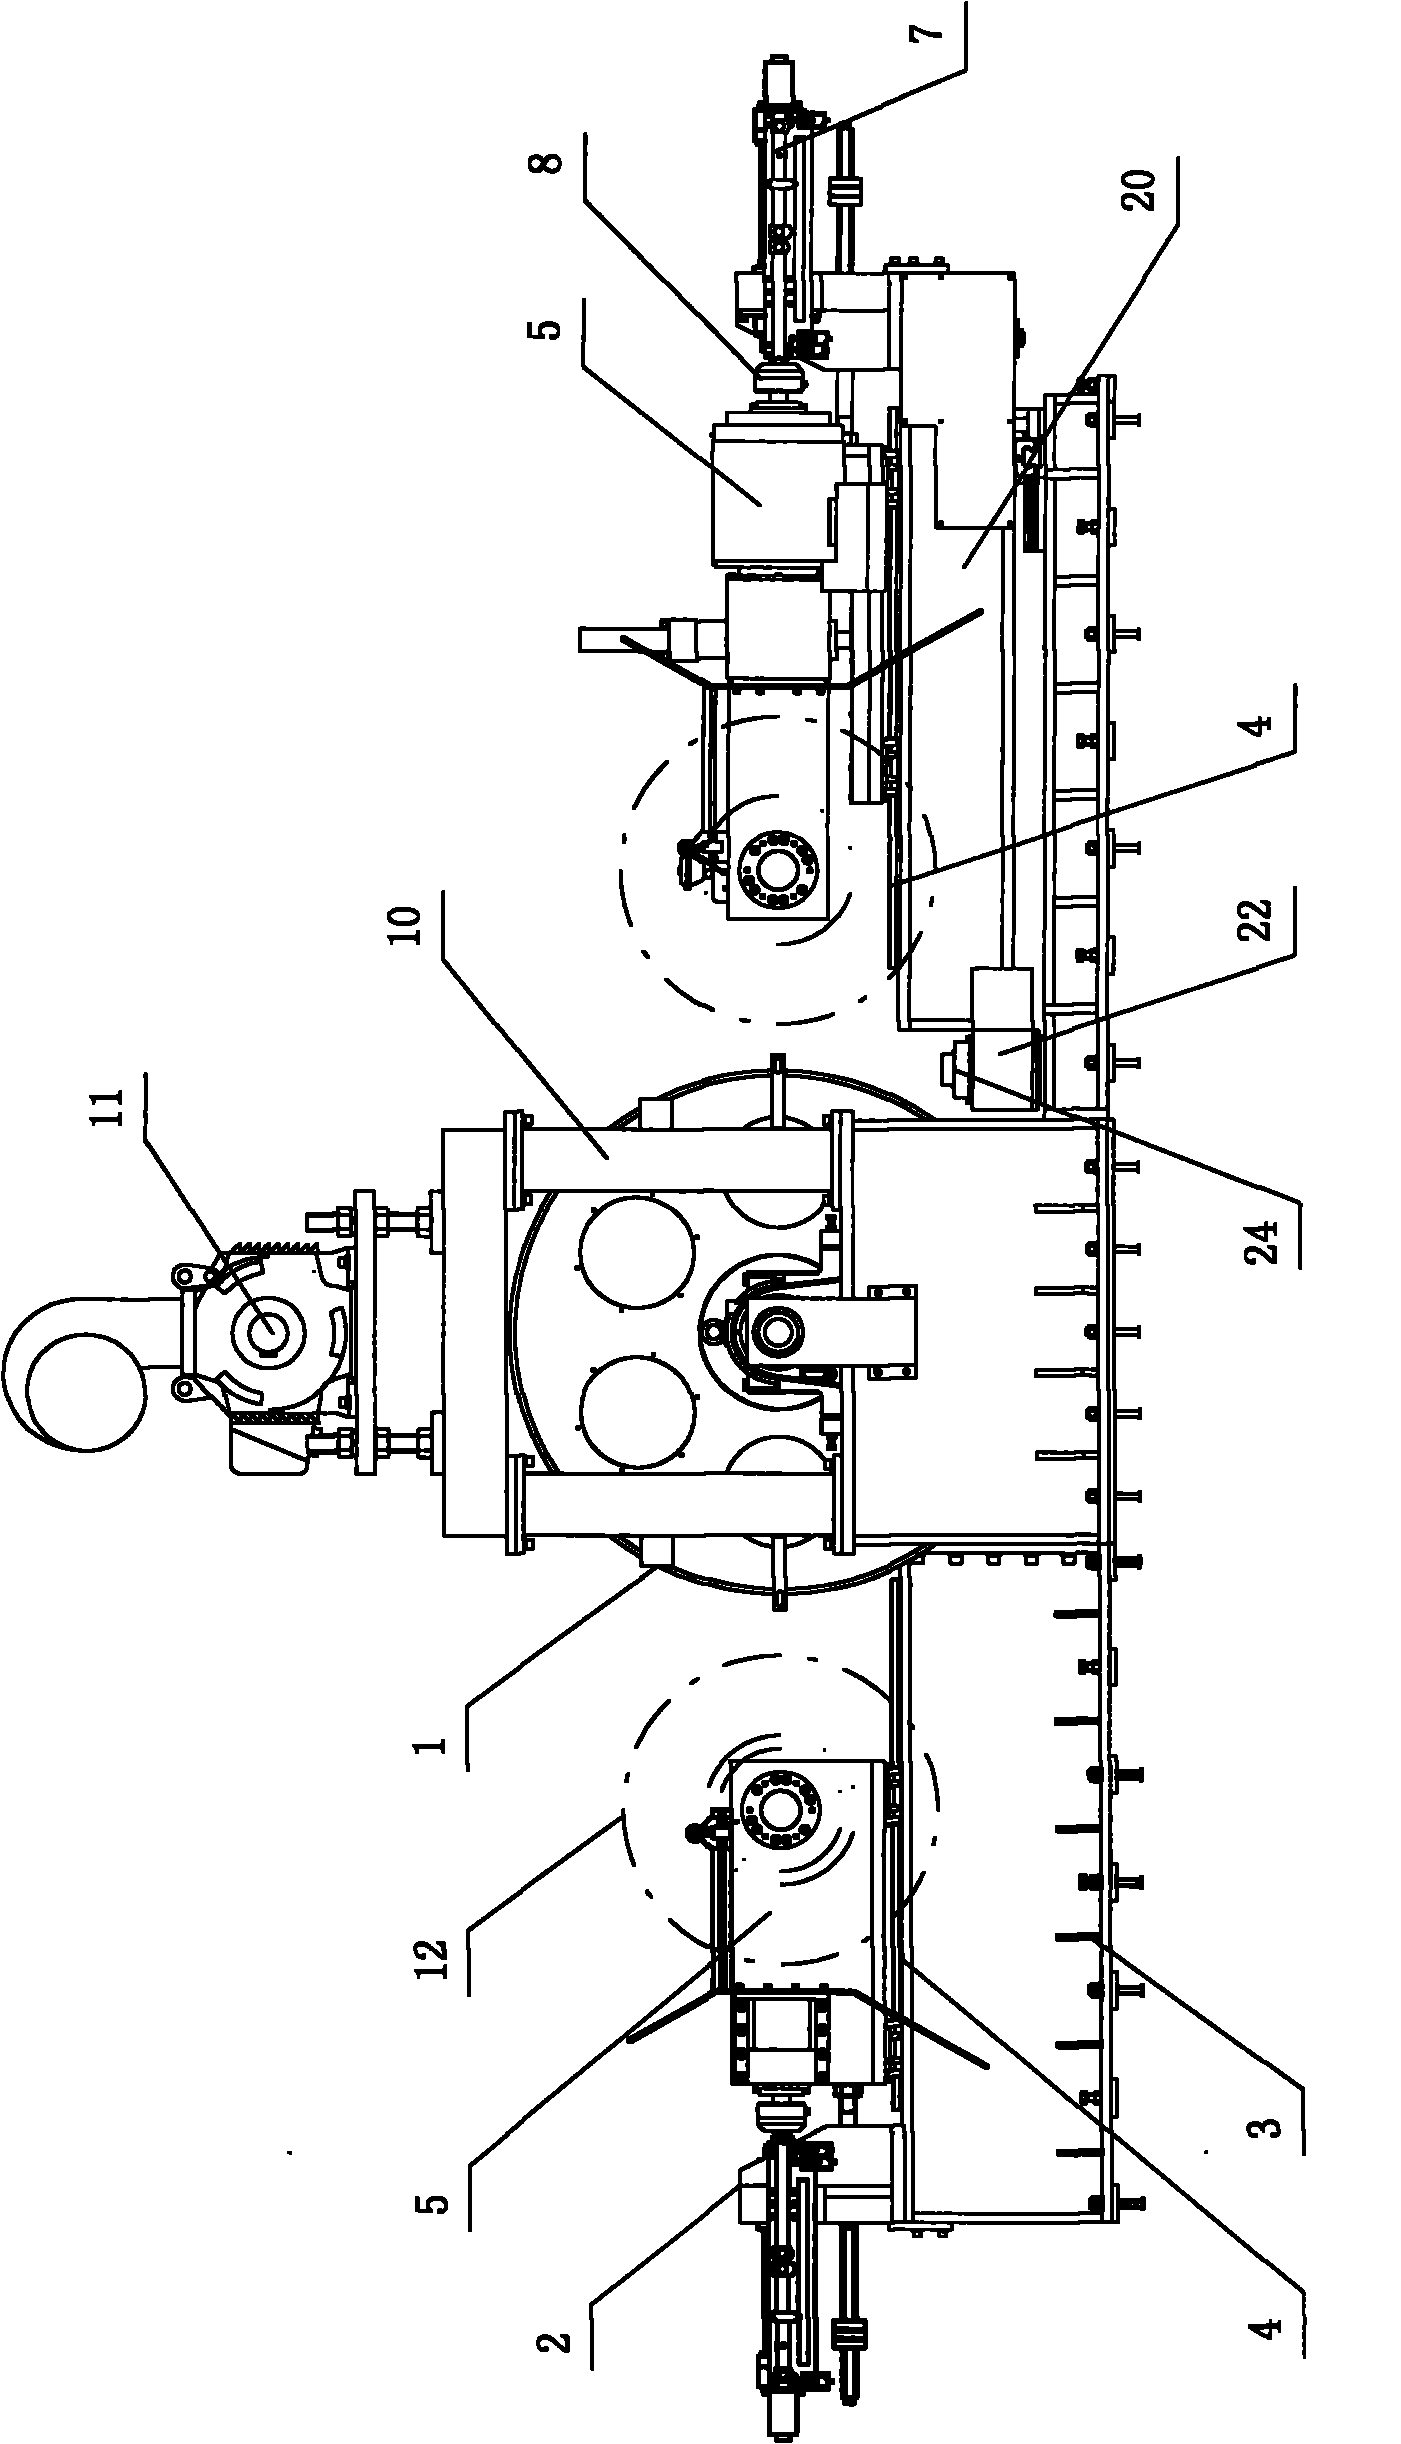 Inclination detection device and method for tire durability